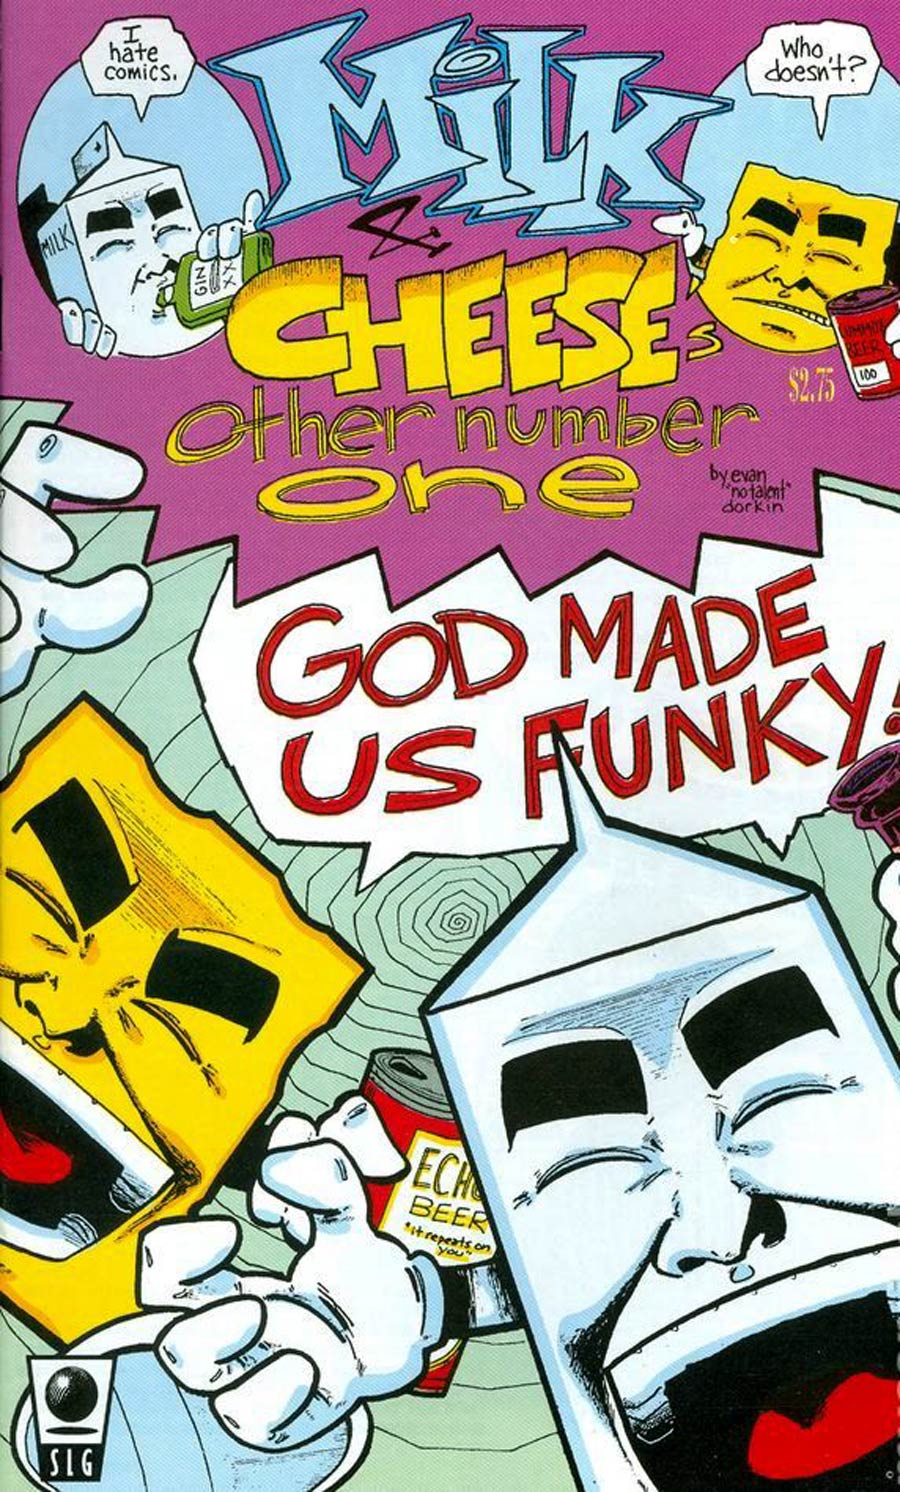 Milk And Cheese #2 (Milk And Cheeses Other Number One) Cover F 6th Ptg